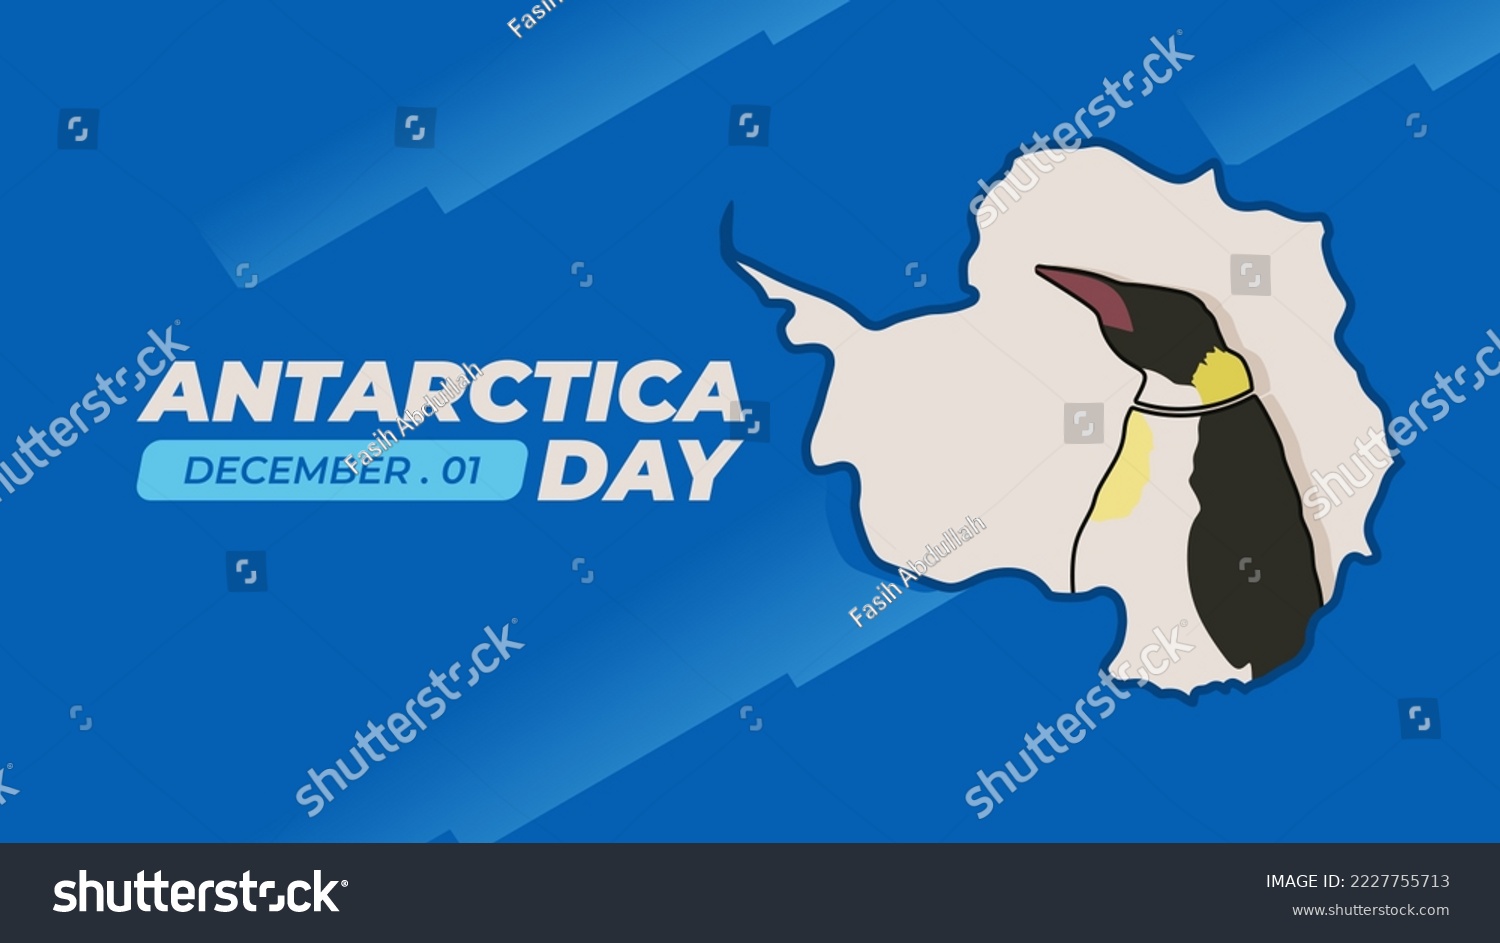 SVG of Antarctica day vector illustration template in trendy design style, with antarctica map and penguin. Observed every december 1. Perfect for your graphic resources for many purposes, banner or poster. svg